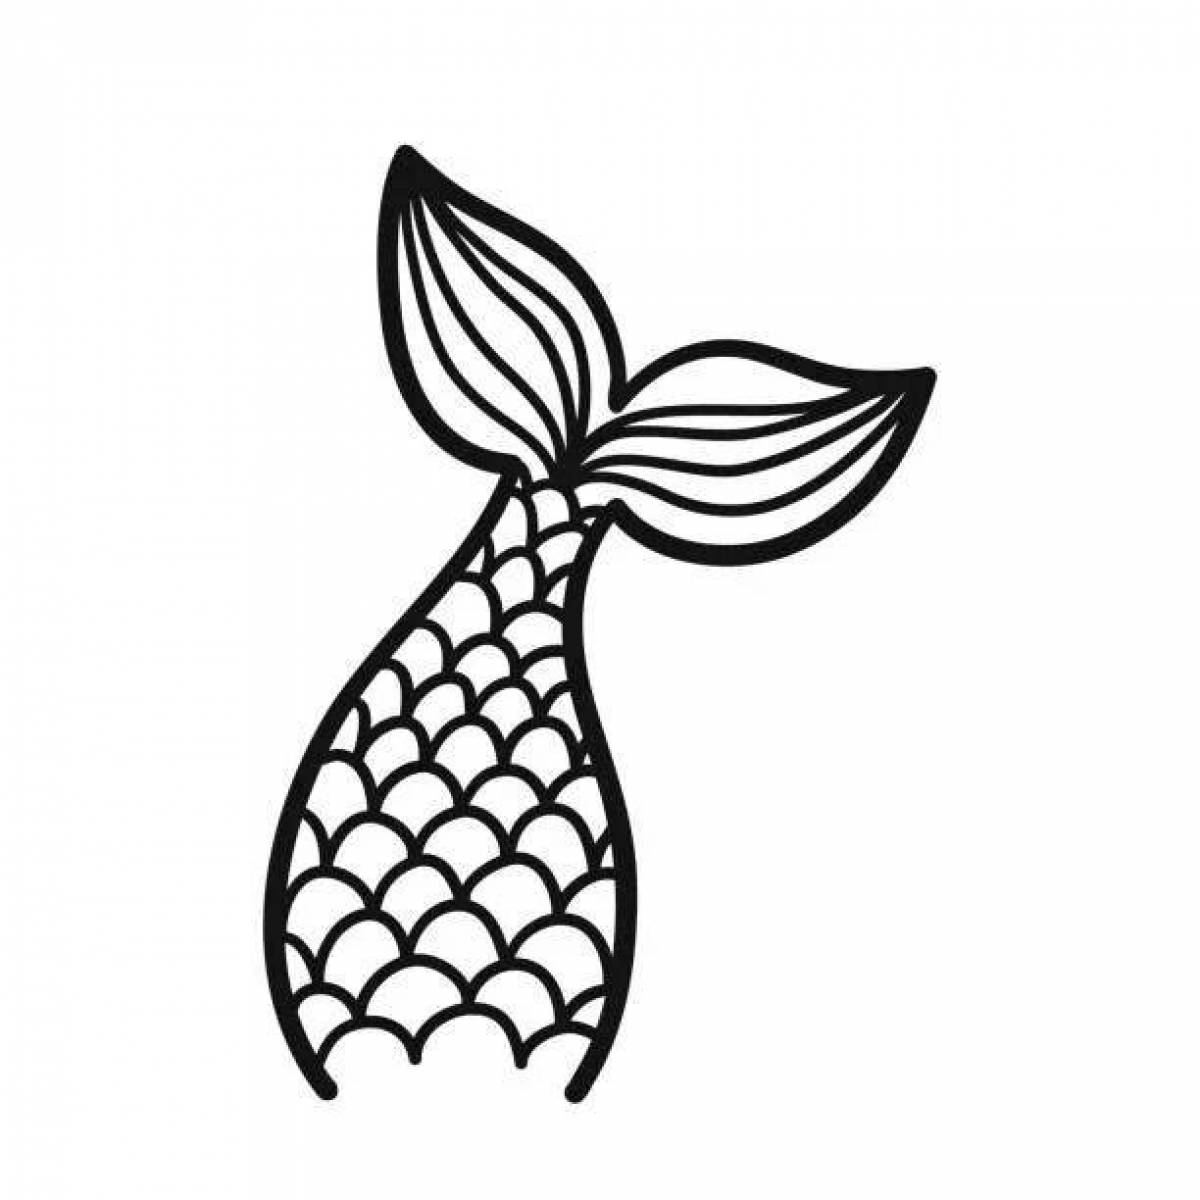 Adorable mermaid tail coloring page